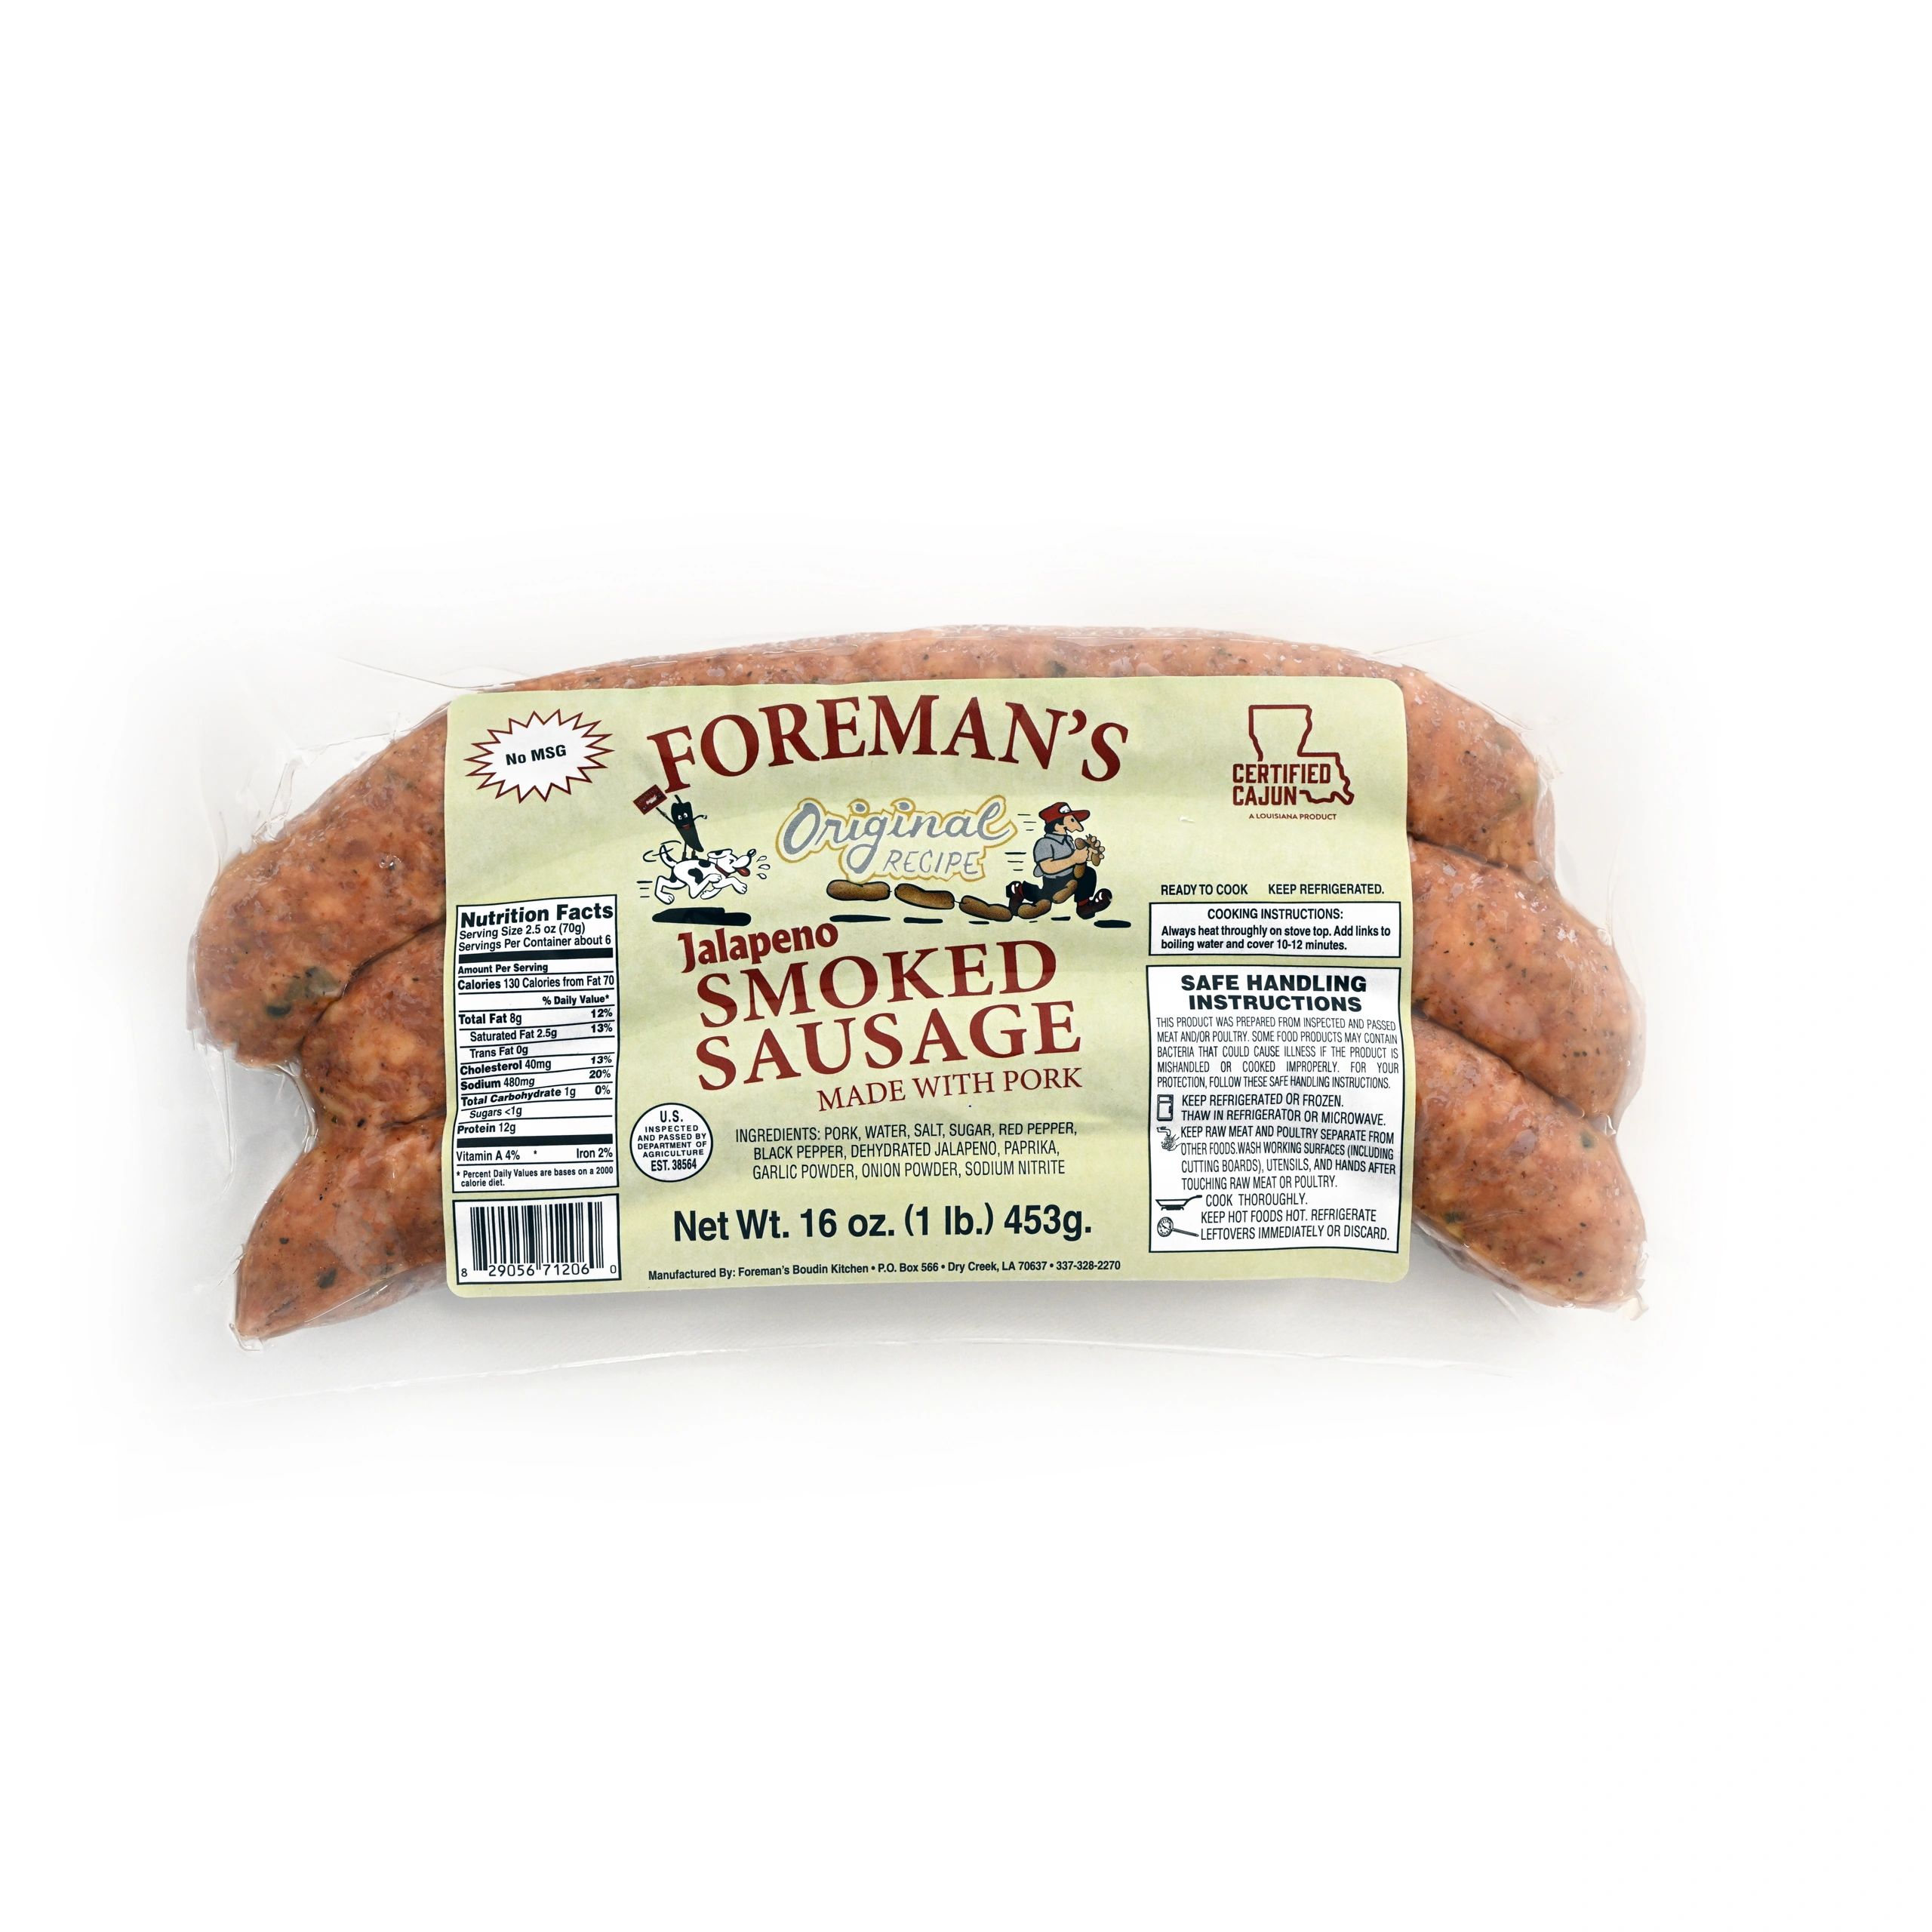 Foremans Jalapeño Smoked Sausage made with pork in a 16 oz package on a white background.